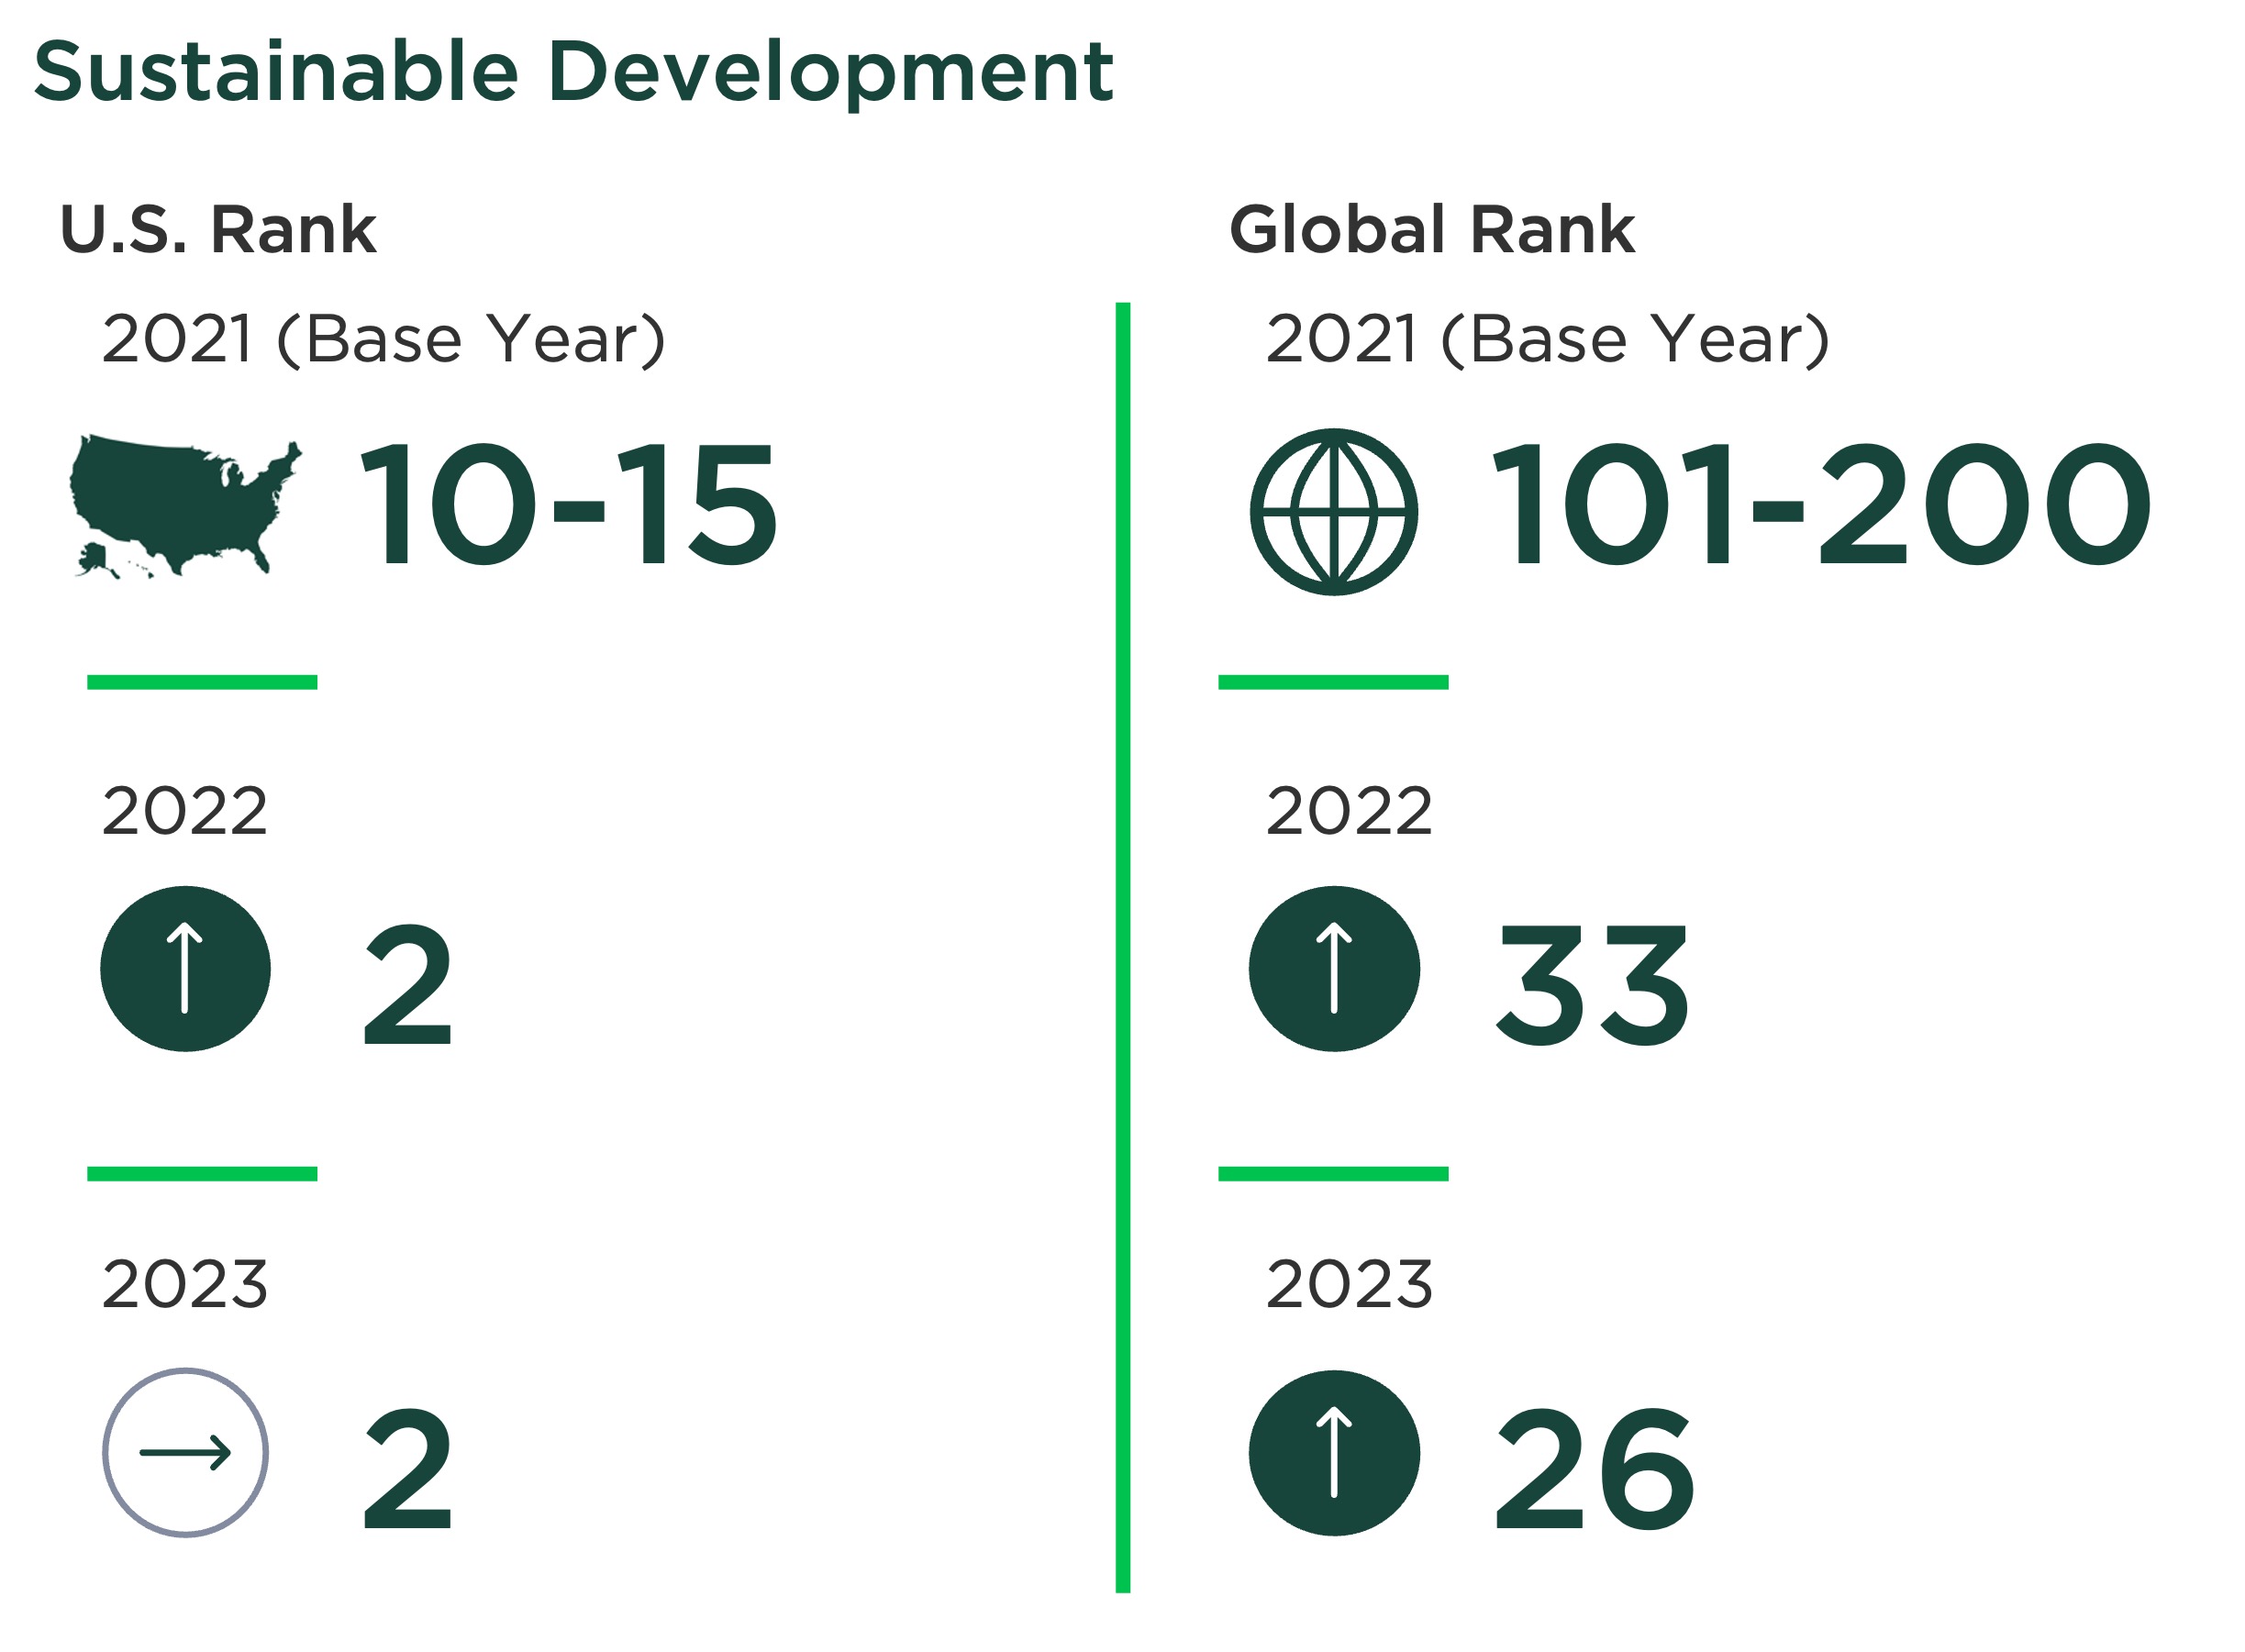 chart showing U.S. and global rankings for sustainable development